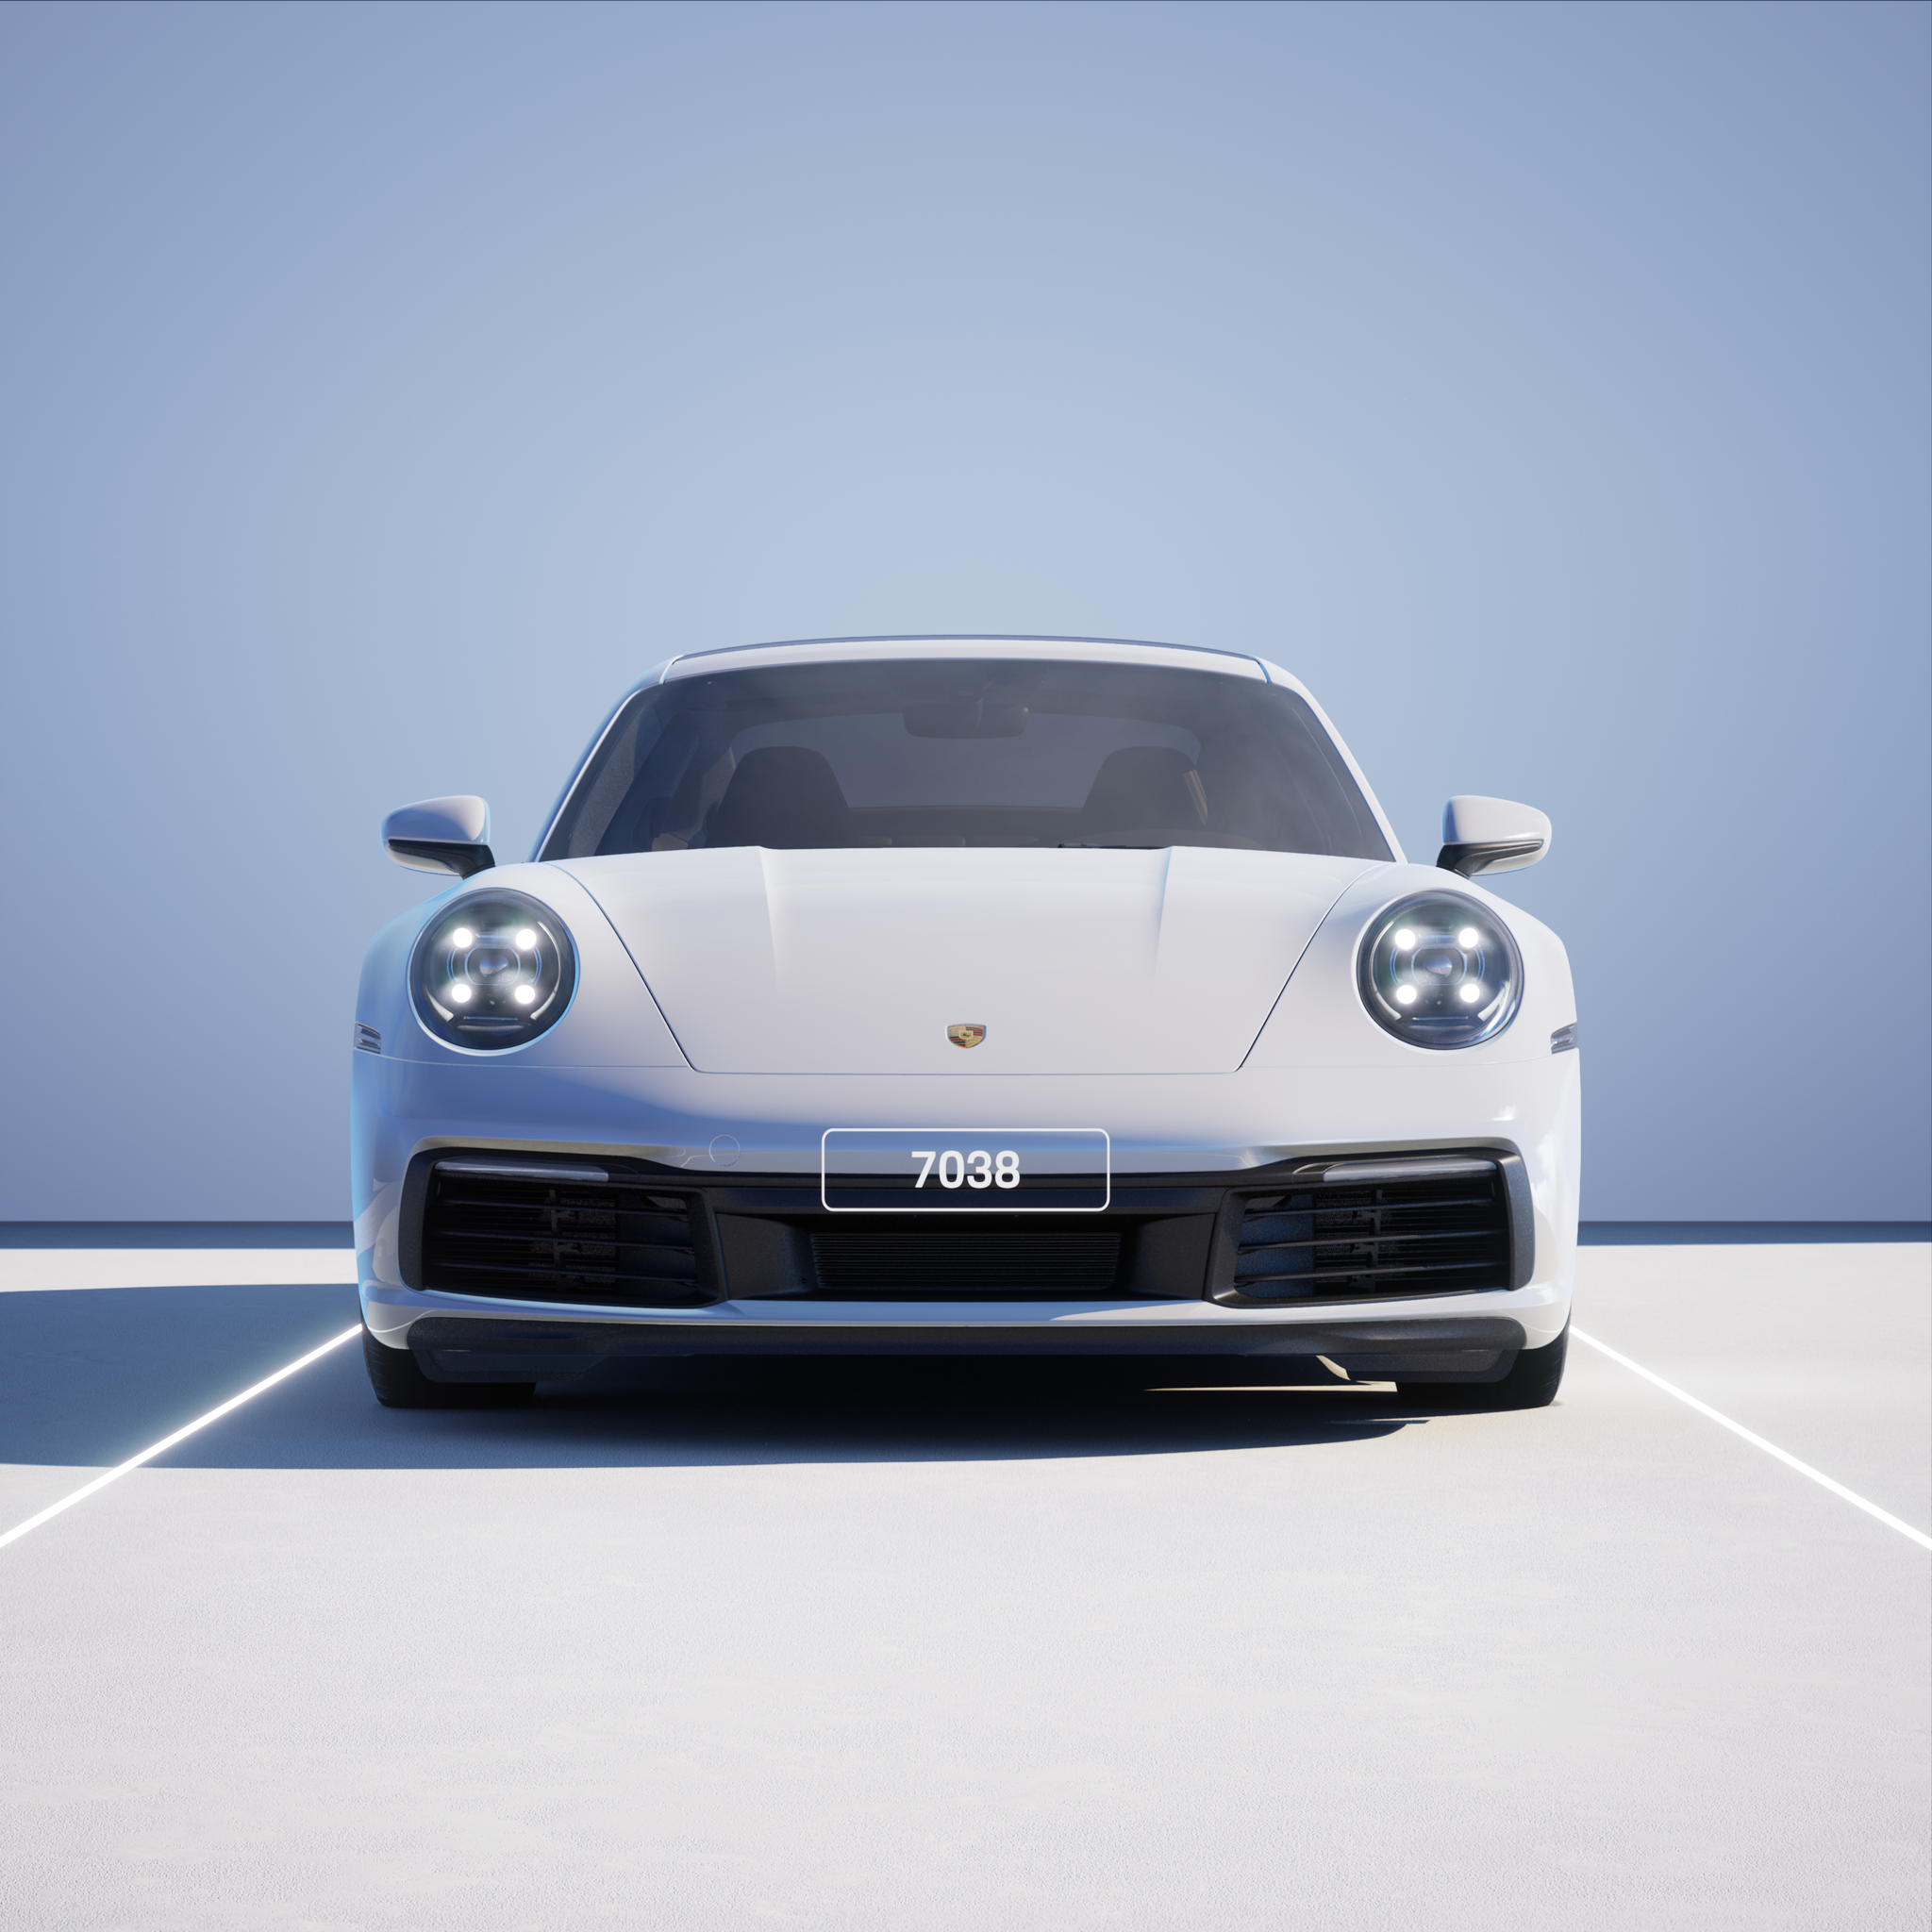 The PORSCHΞ 911 7038 image in phase